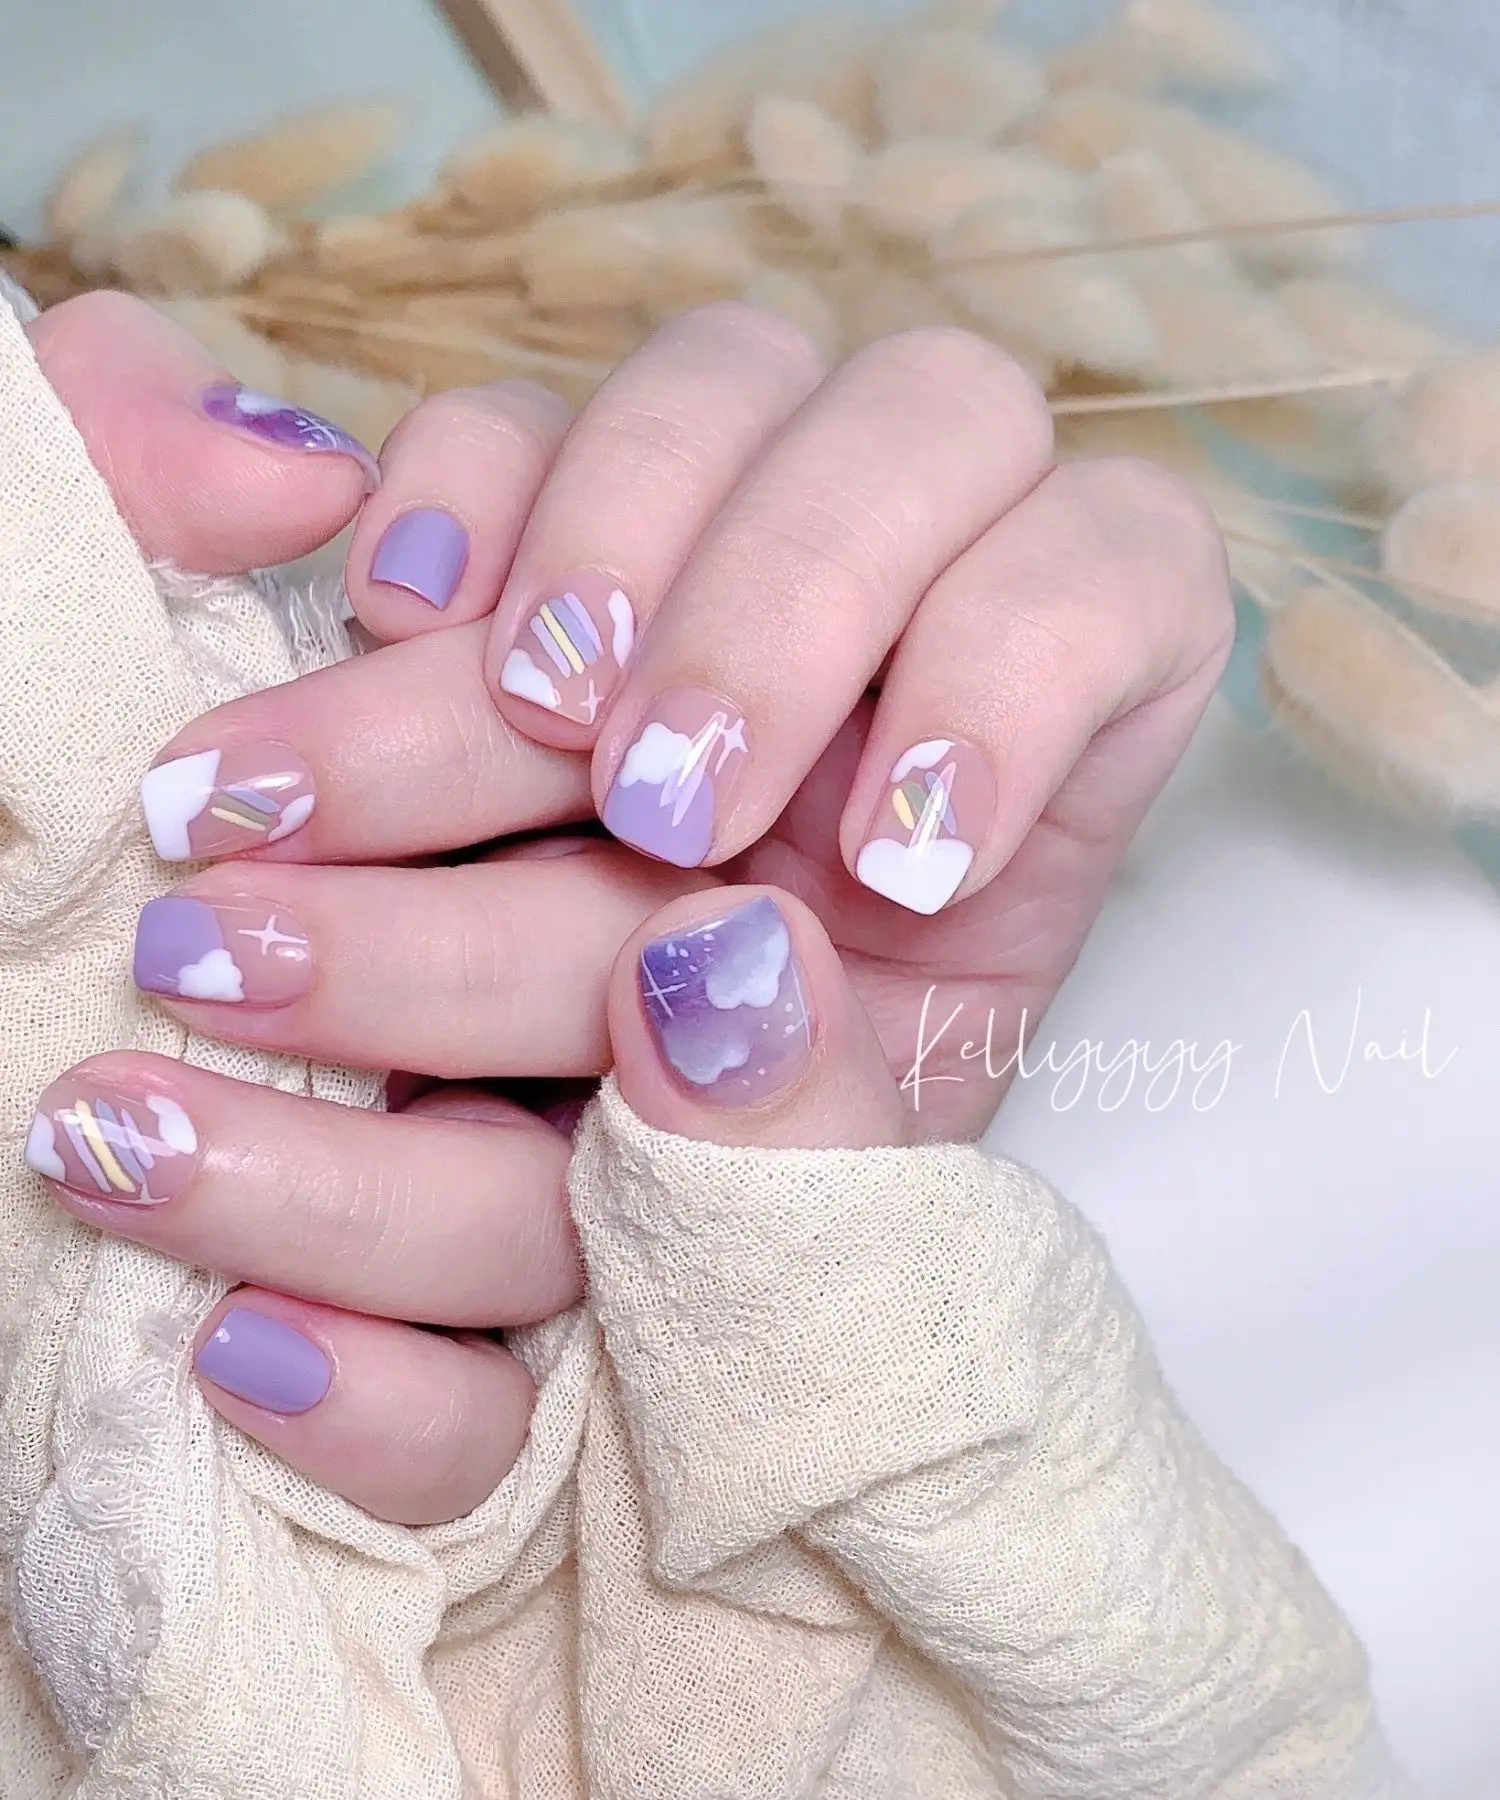 OMG Japanese LED Nail Decal Review! | The Adorned Claw